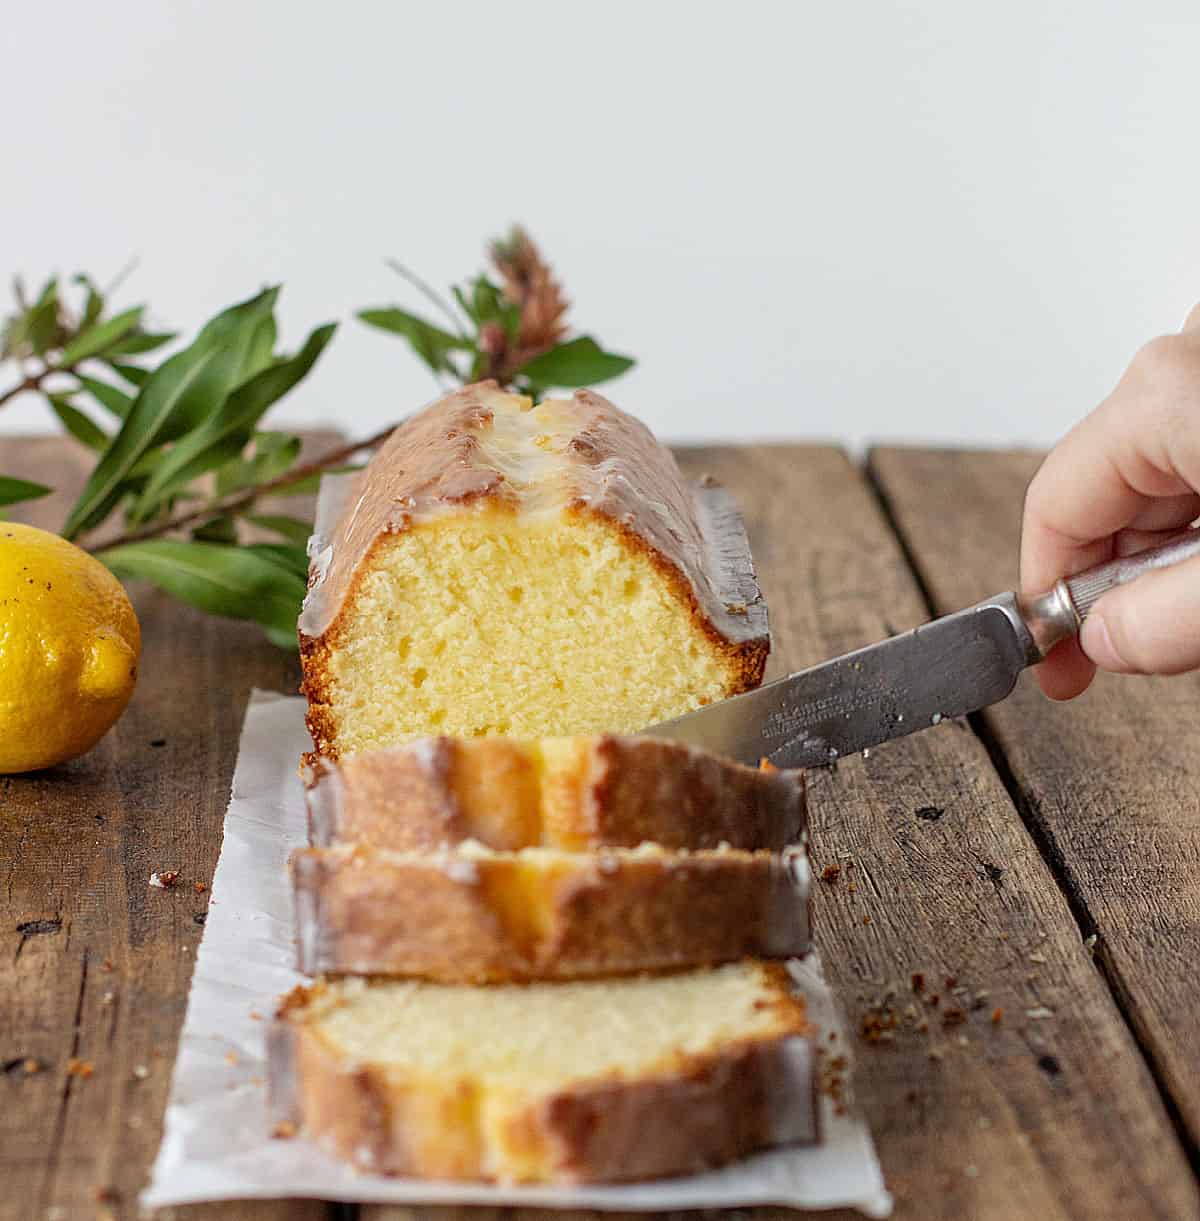 Cutting pound cake slices on a wooden board, lemon and leaves as props